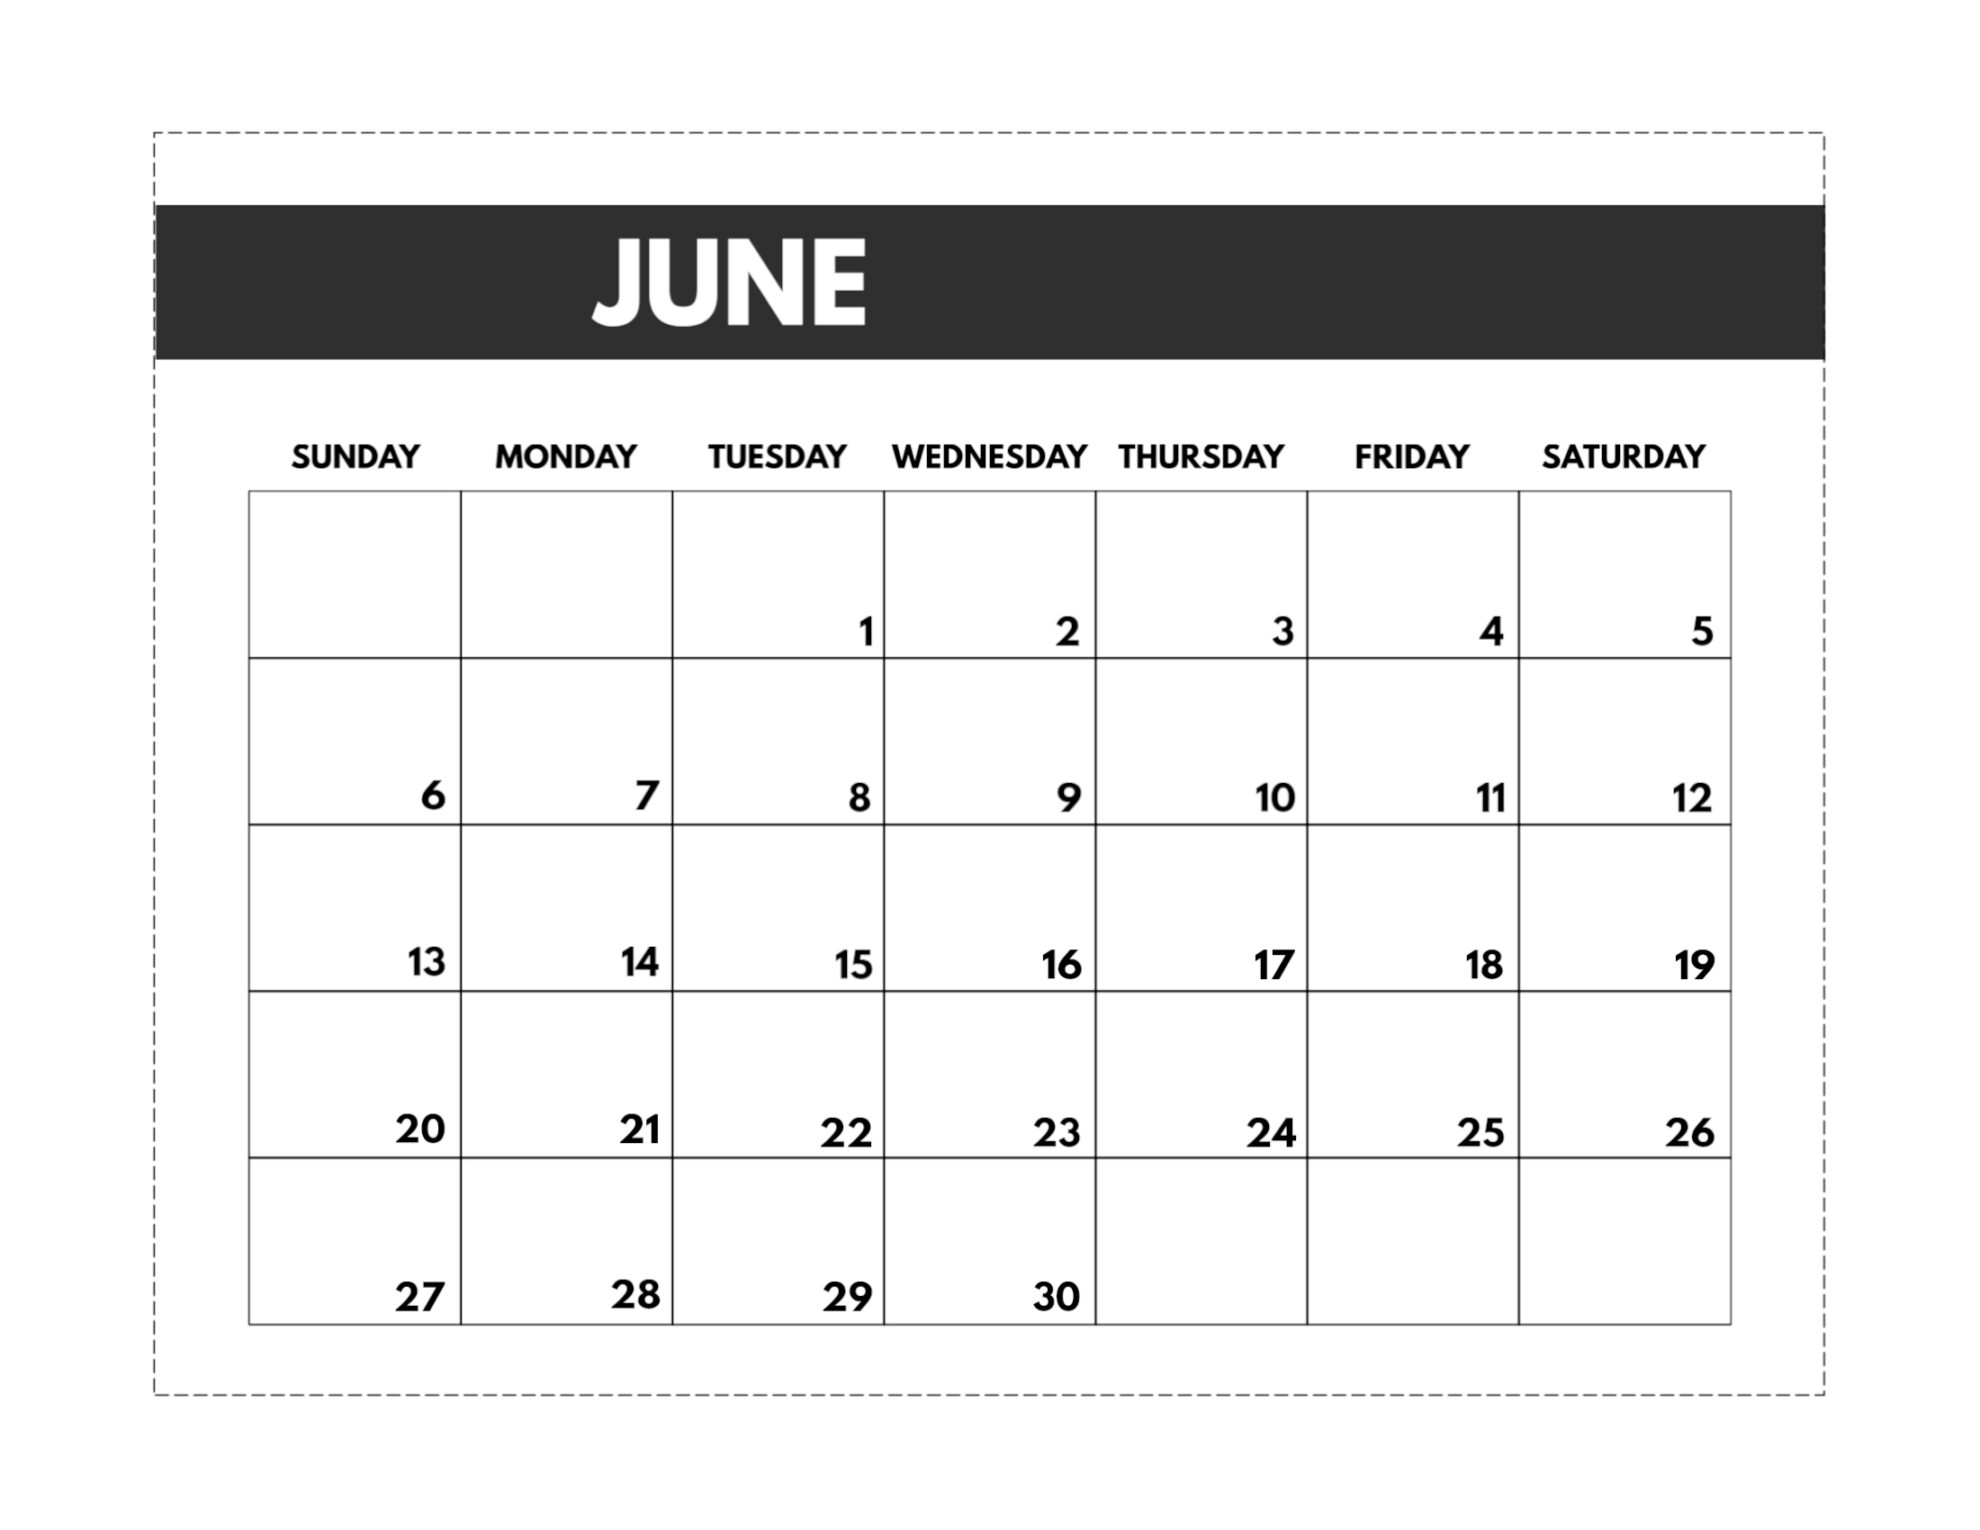 2021 Free Monthly Calendar Templates | Paper Trail Design